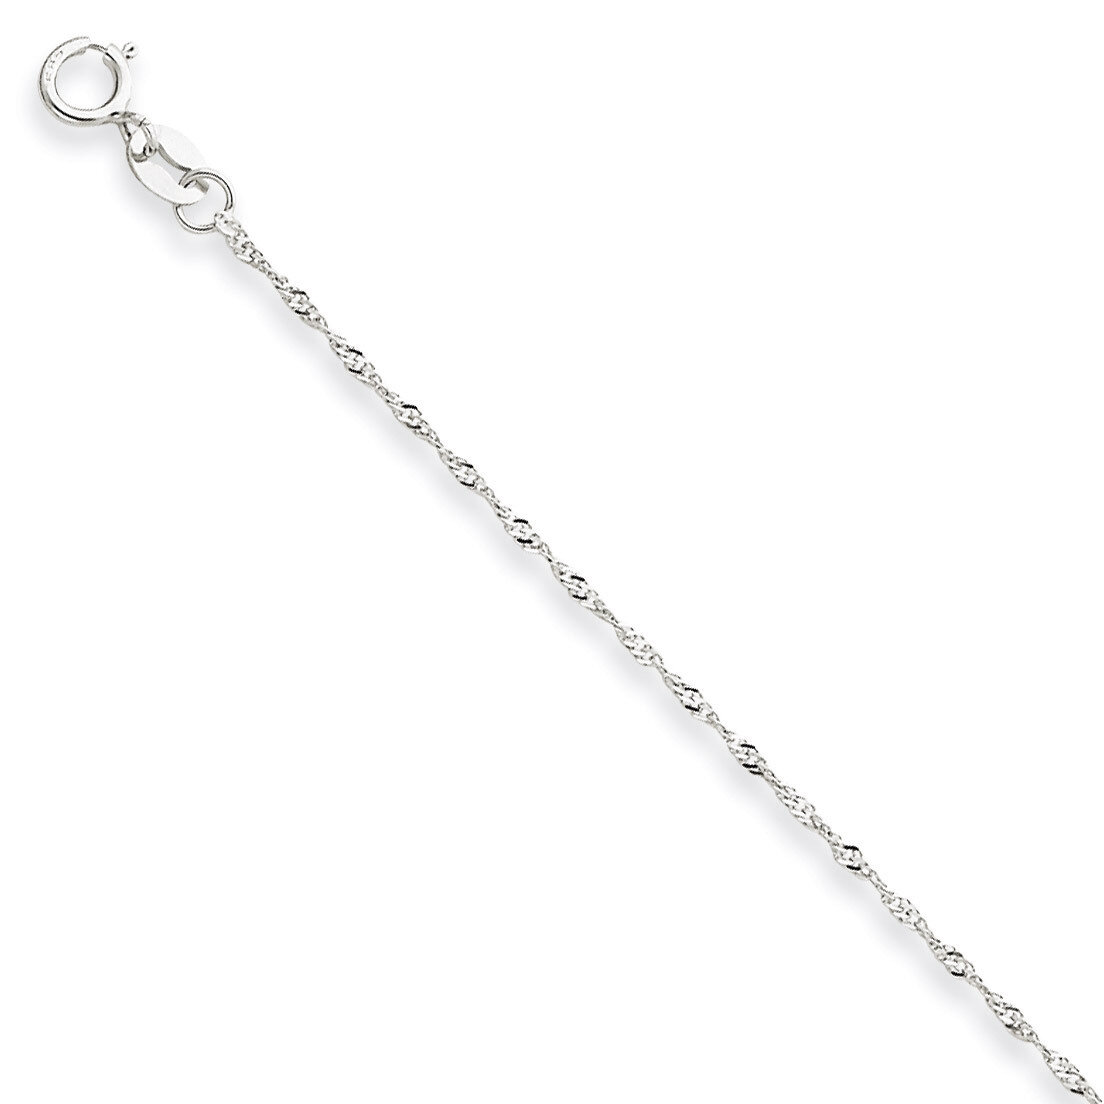 1mm Singapore Chain (CARDED) 18 Inch 14k White Gold 10SW-18